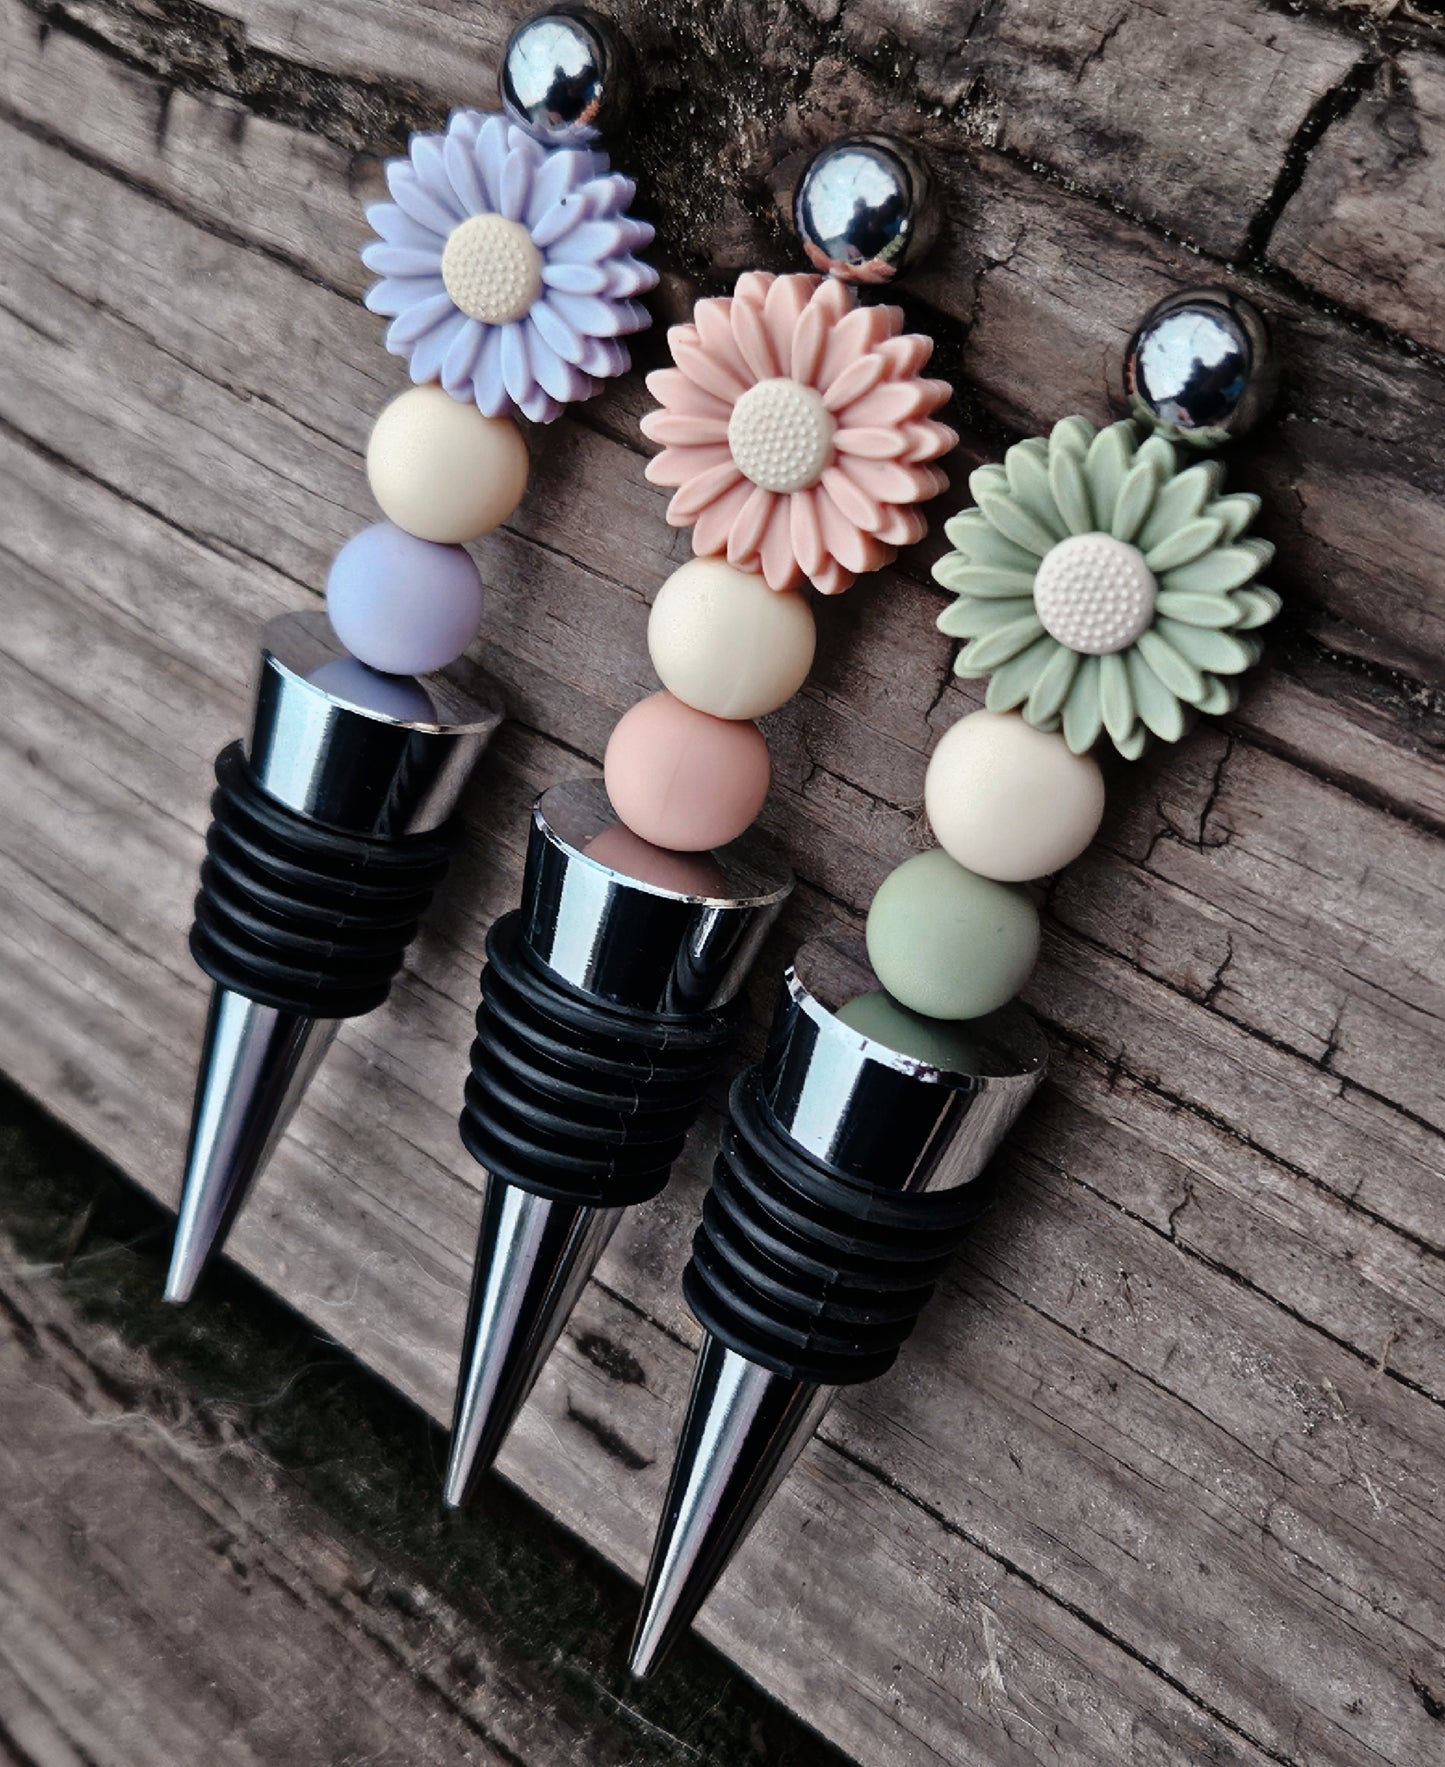 Flower wine stoppers